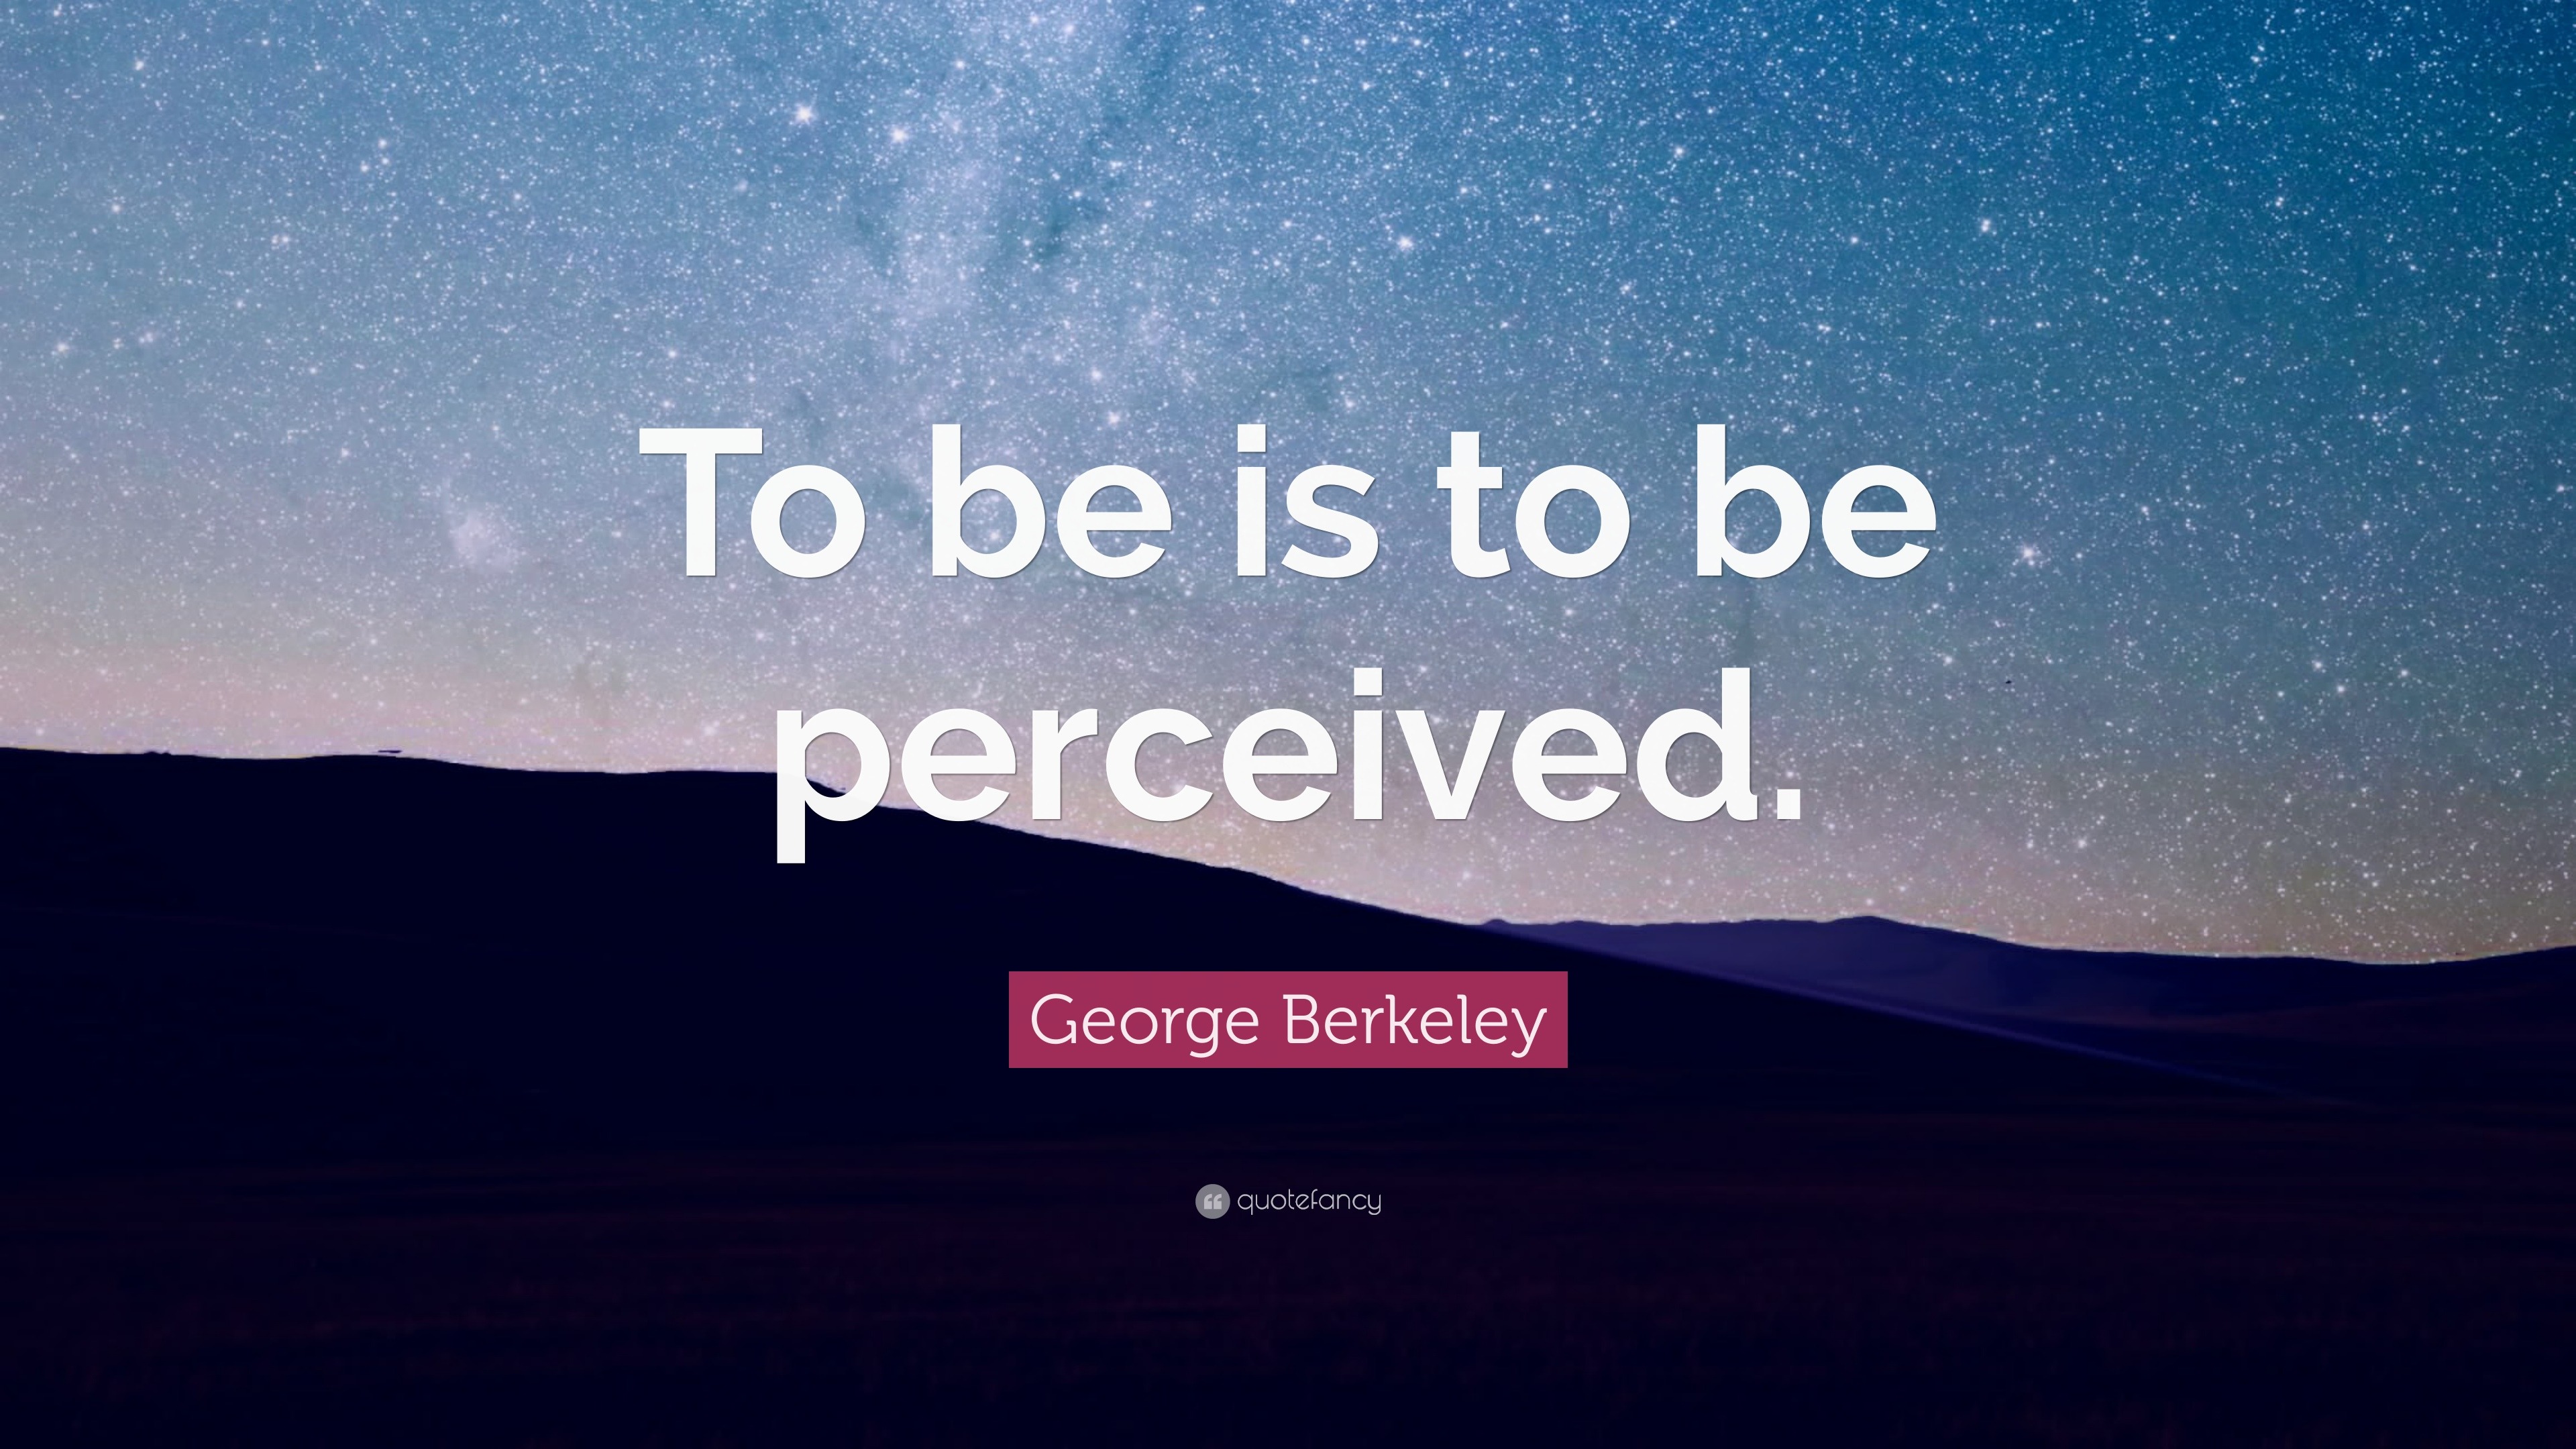 George Berkeley Quote: “To be is to be perceived.”